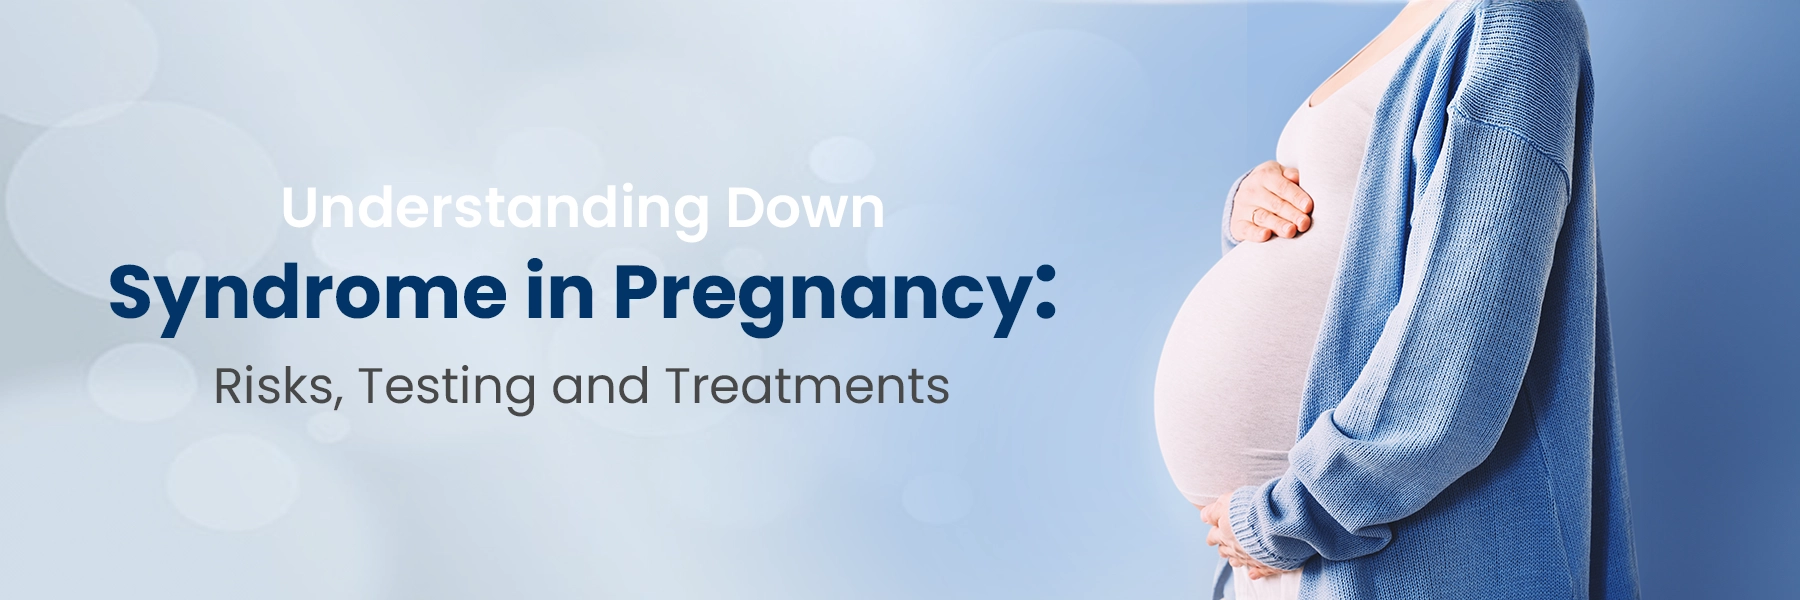 down syndrome in pregnancy